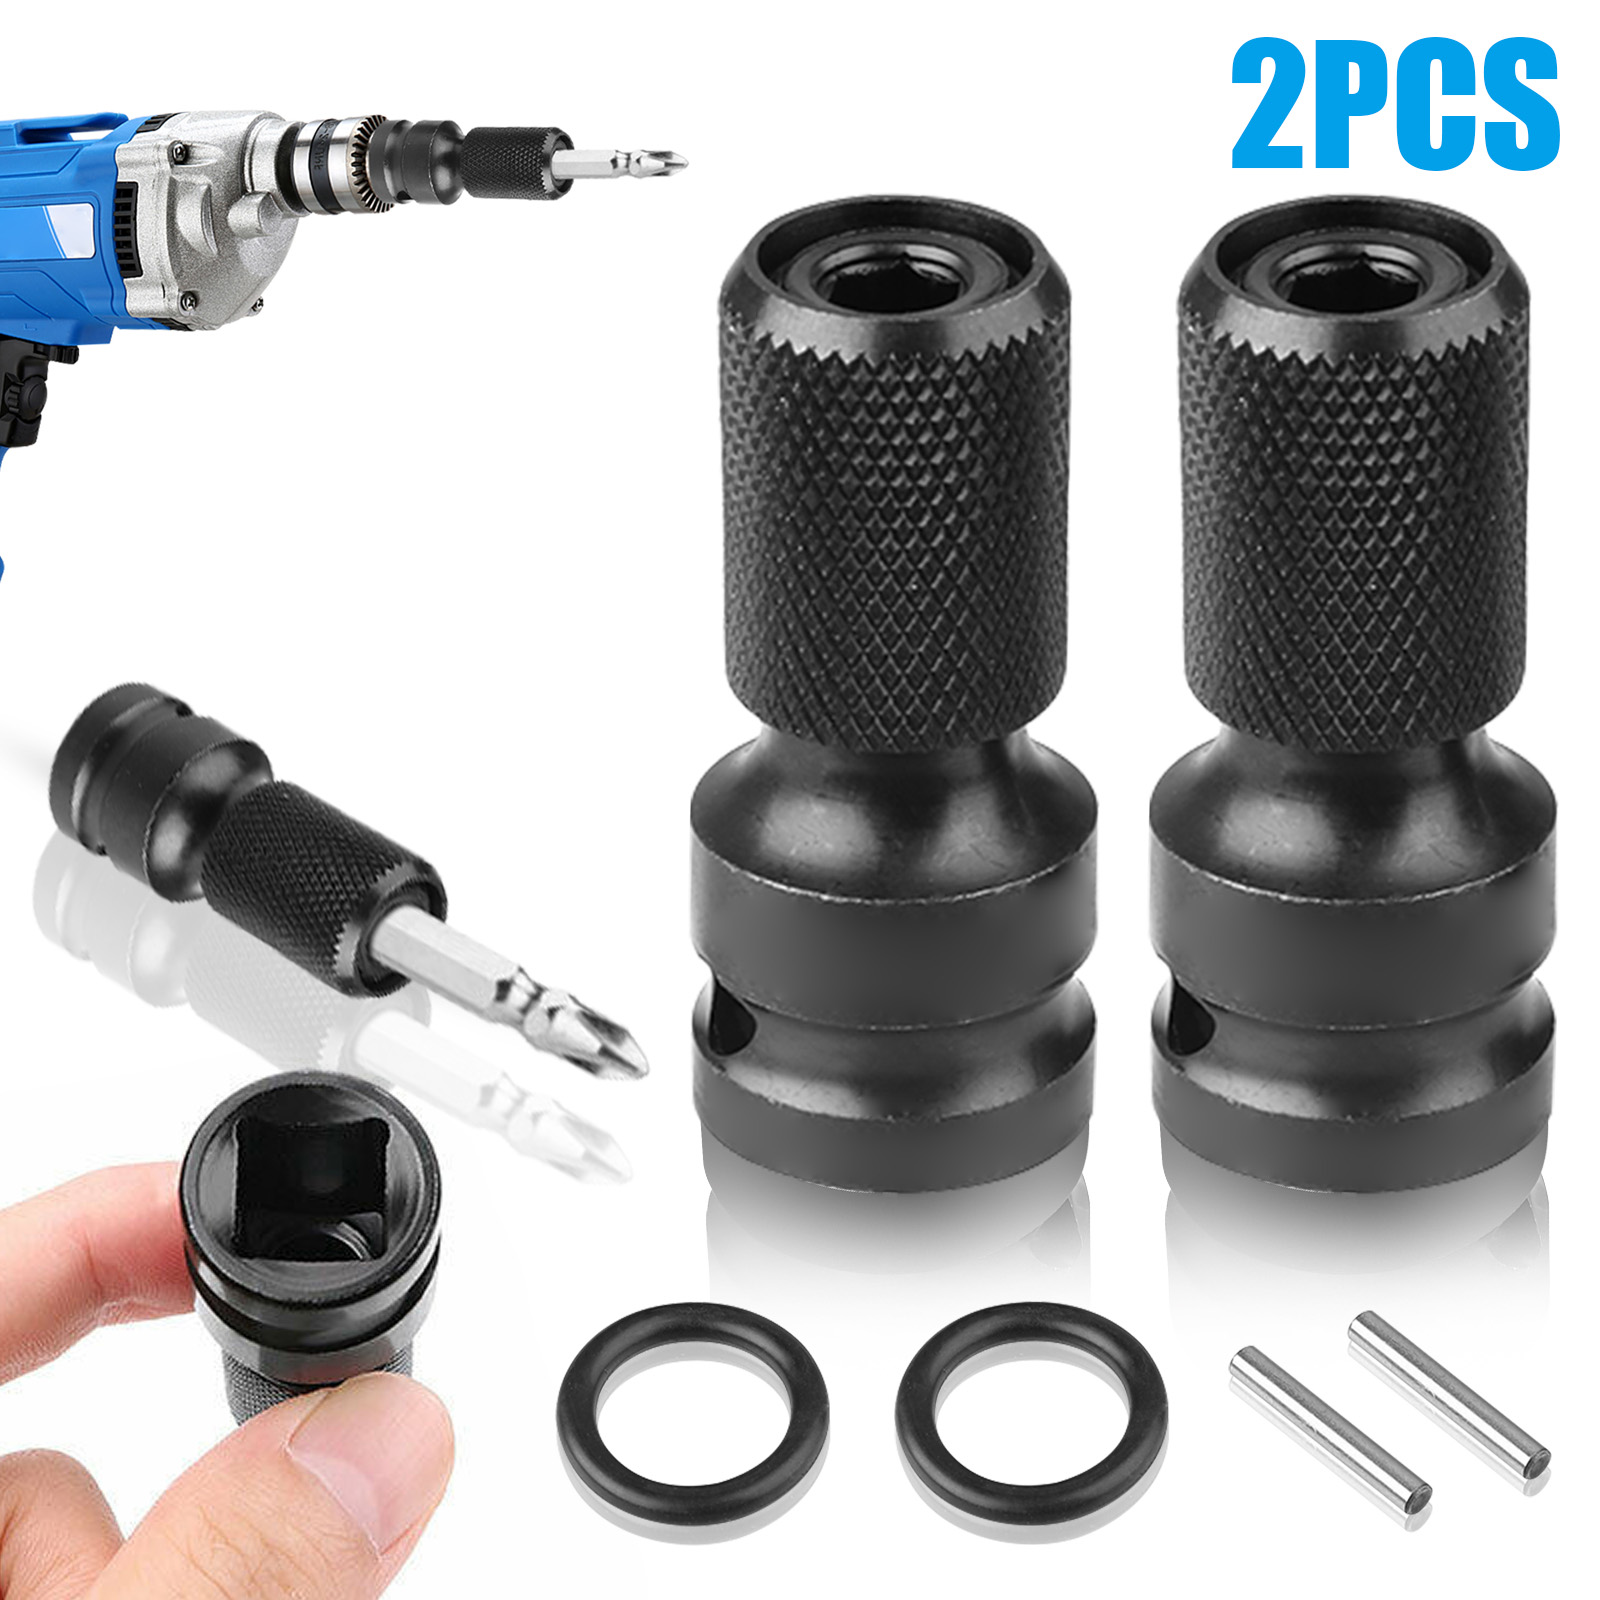 1/2 Square Drive To 1/4 Hex Shank Flexible Socket Adapter Drill Chuck Tools